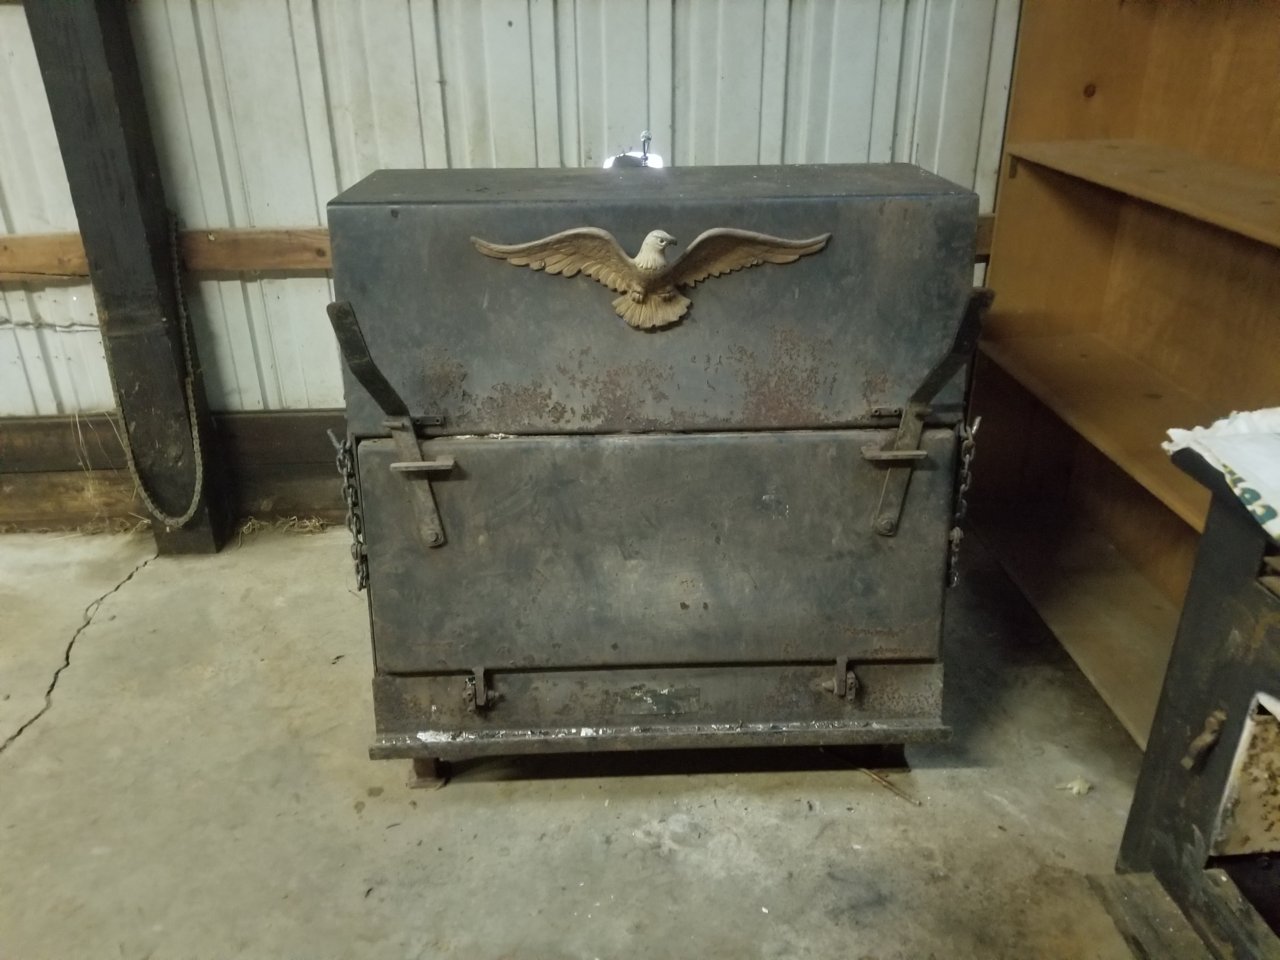 What brand wood stove is this?